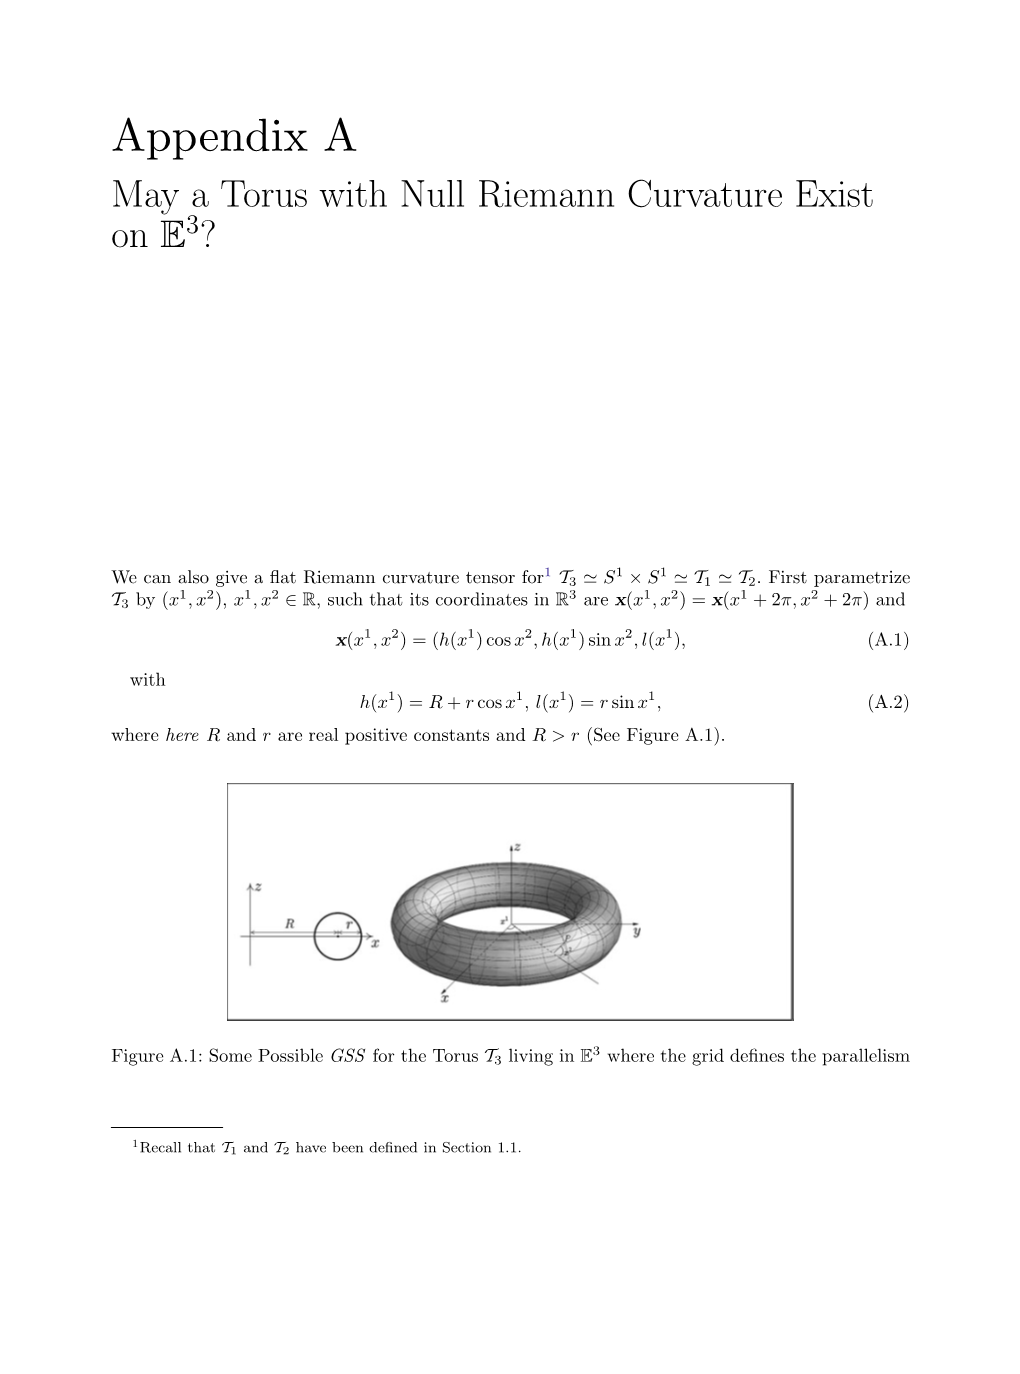 Appendix a May a Torus with Null Riemann Curvature Exist on E3?